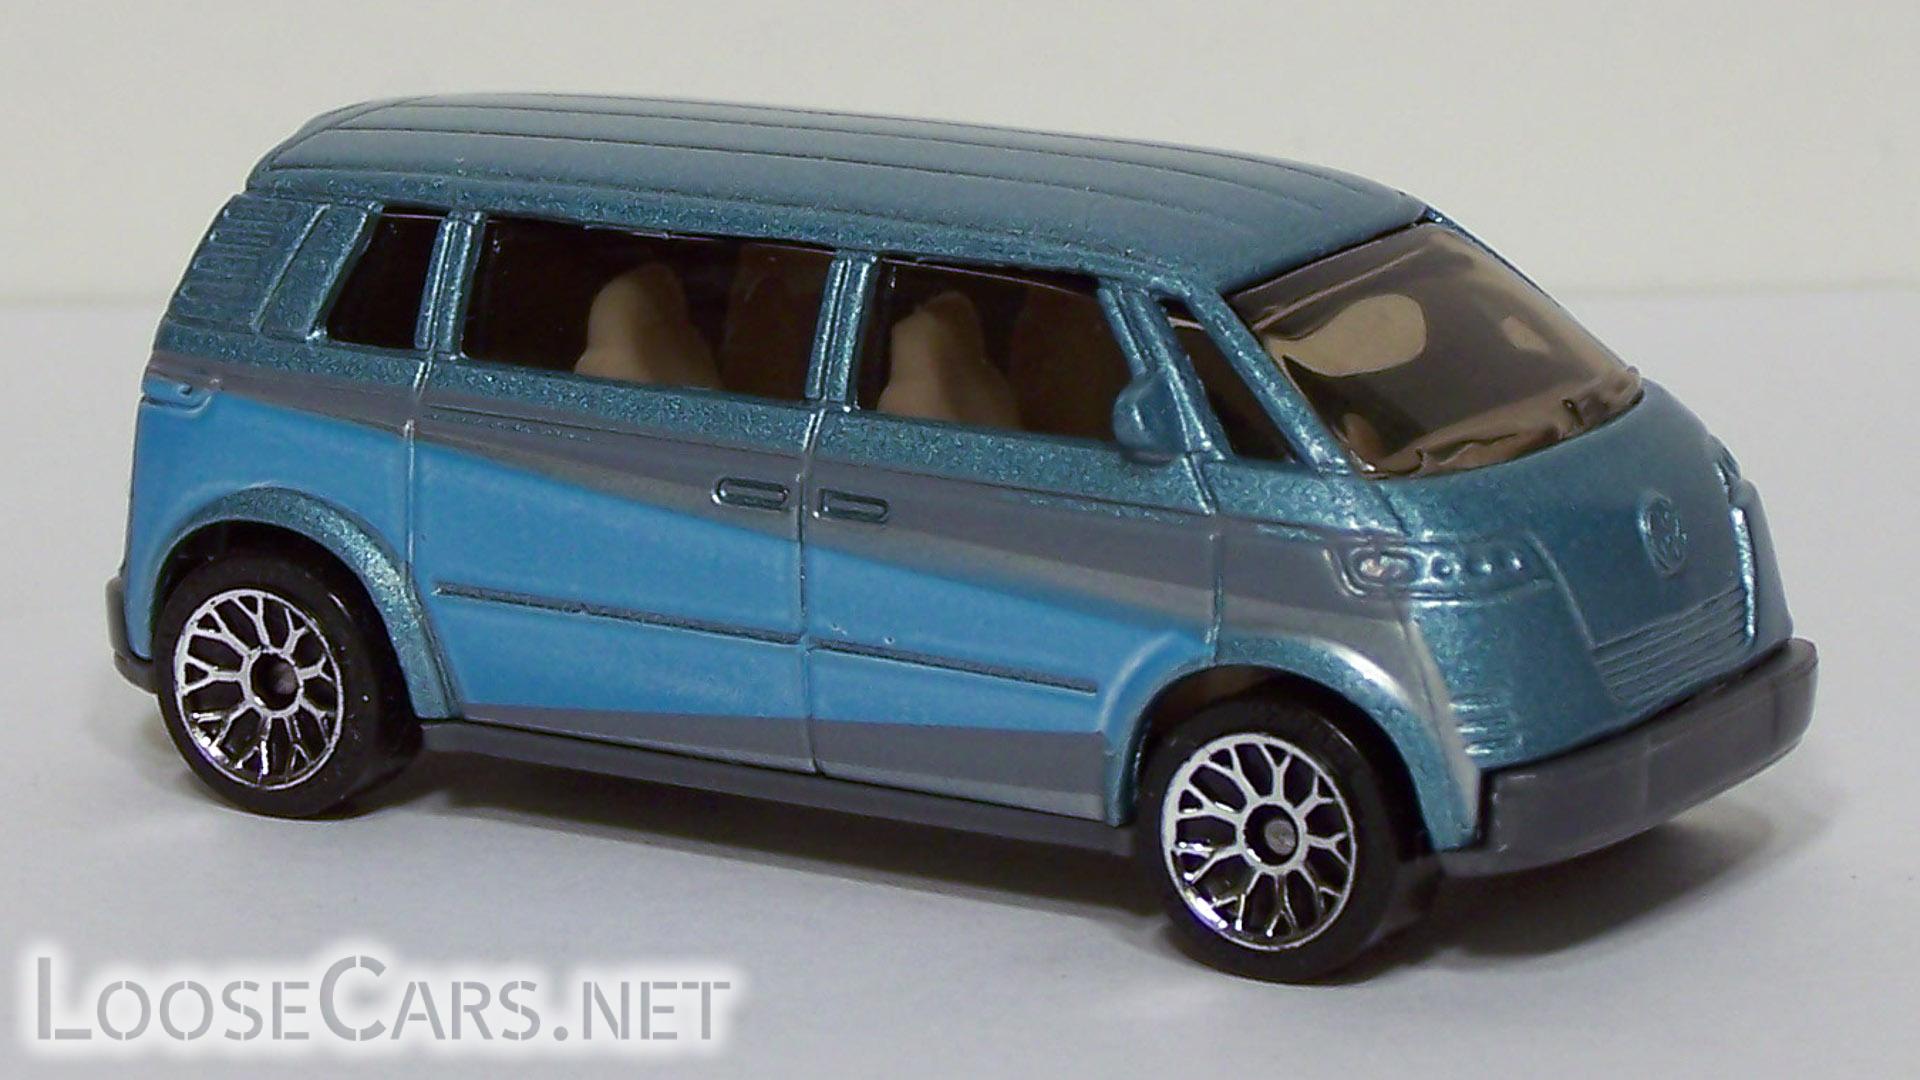 Matchbox Volkswagen Microbus 2005 51 - Front Right